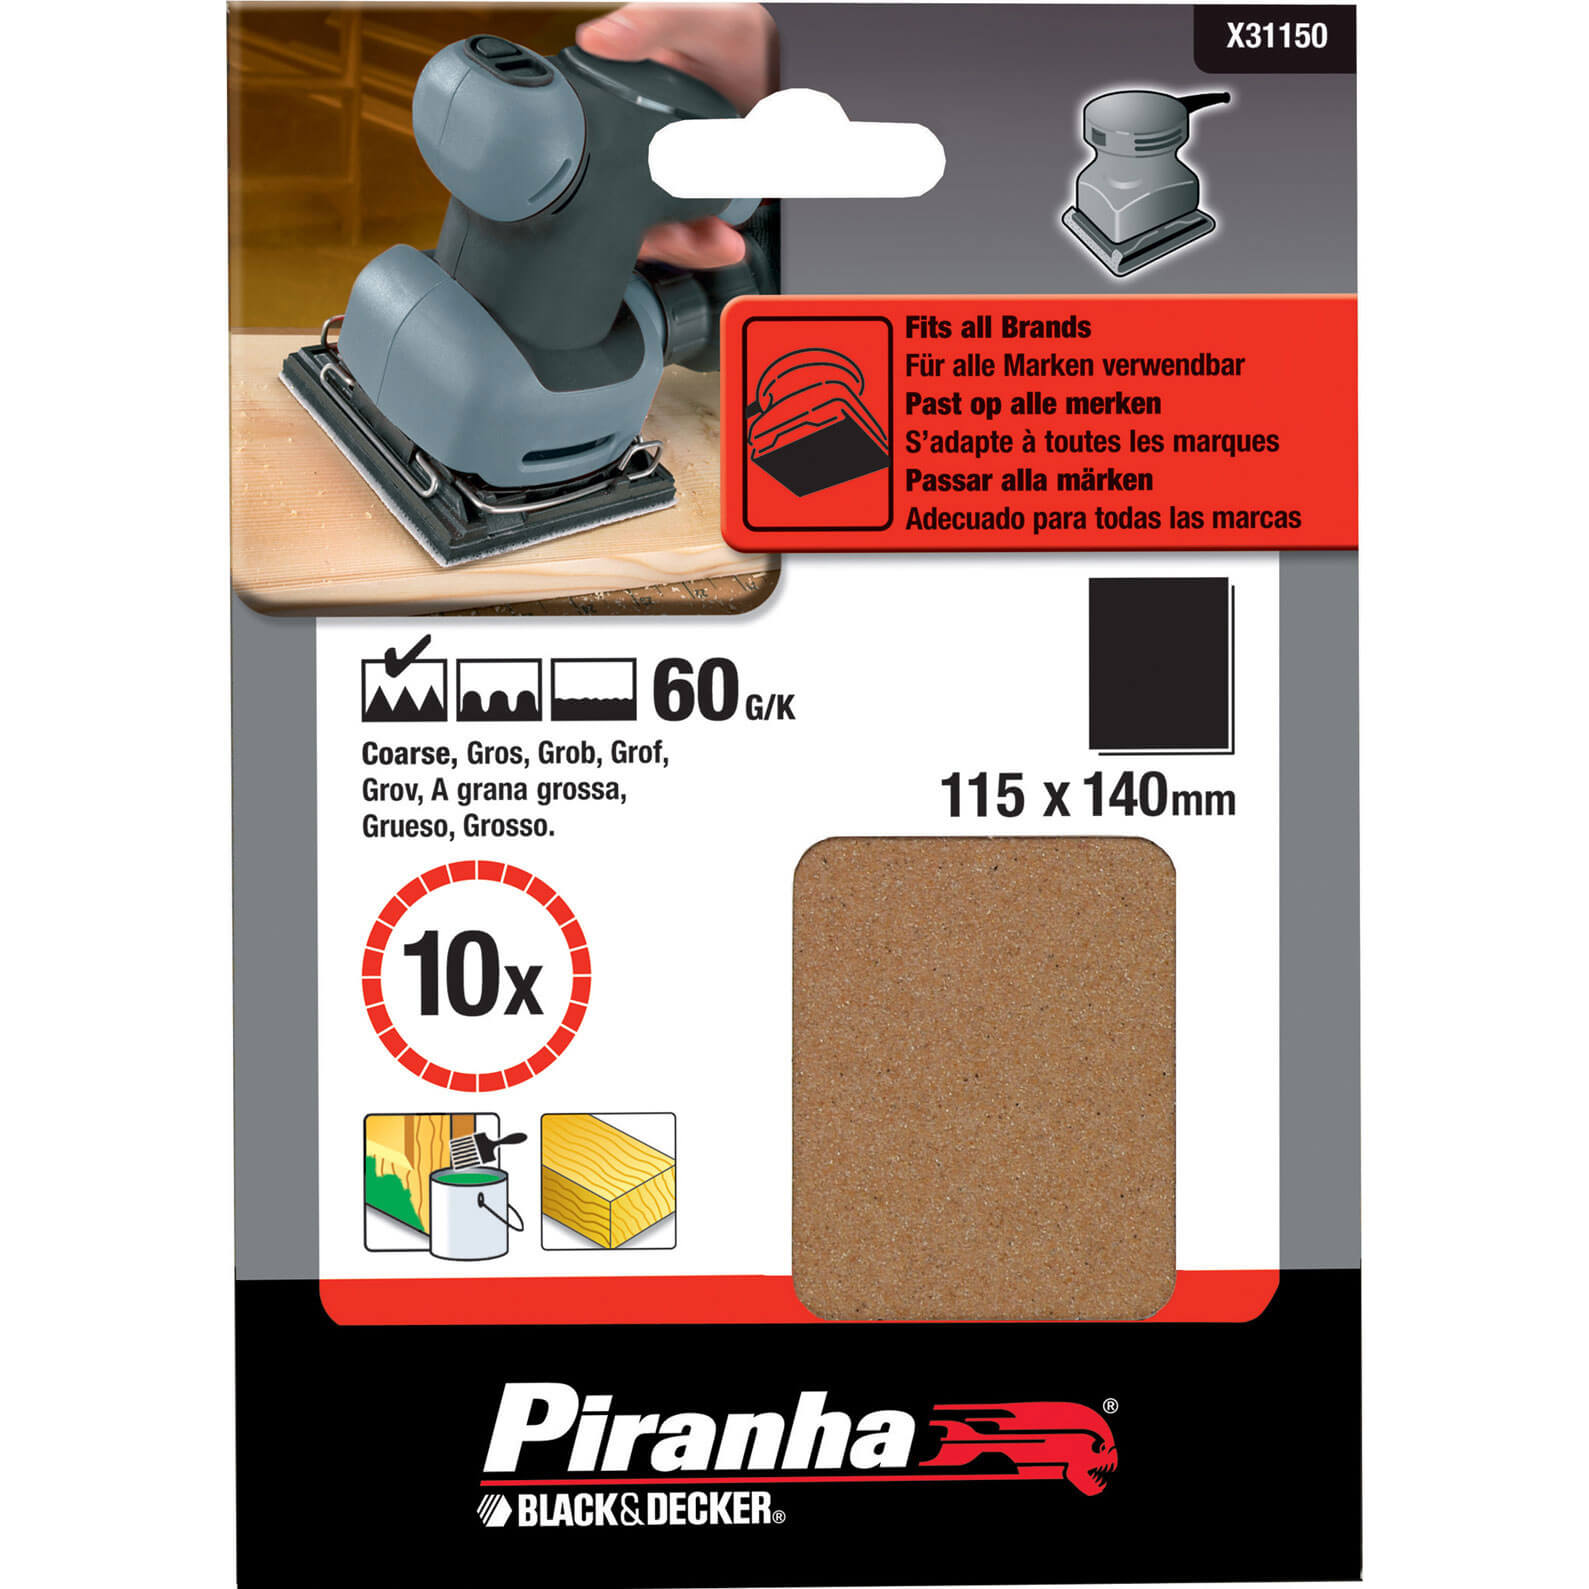 Image of Black and Decker Piranha 1/4 Sanding Sheets 60g Pack of 10